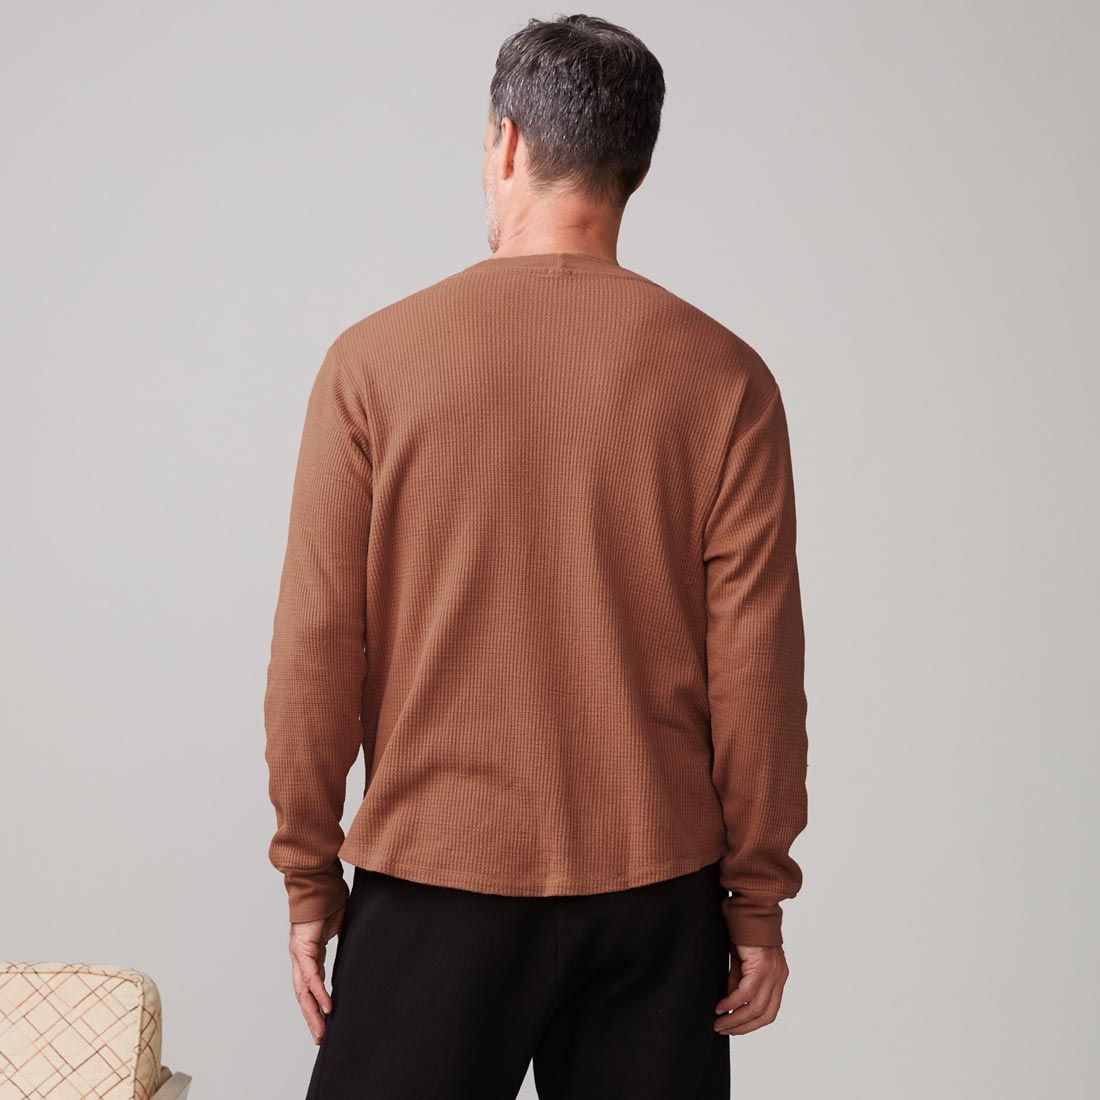 Back view of model wearing the thermal long sleeve crew in caramel.